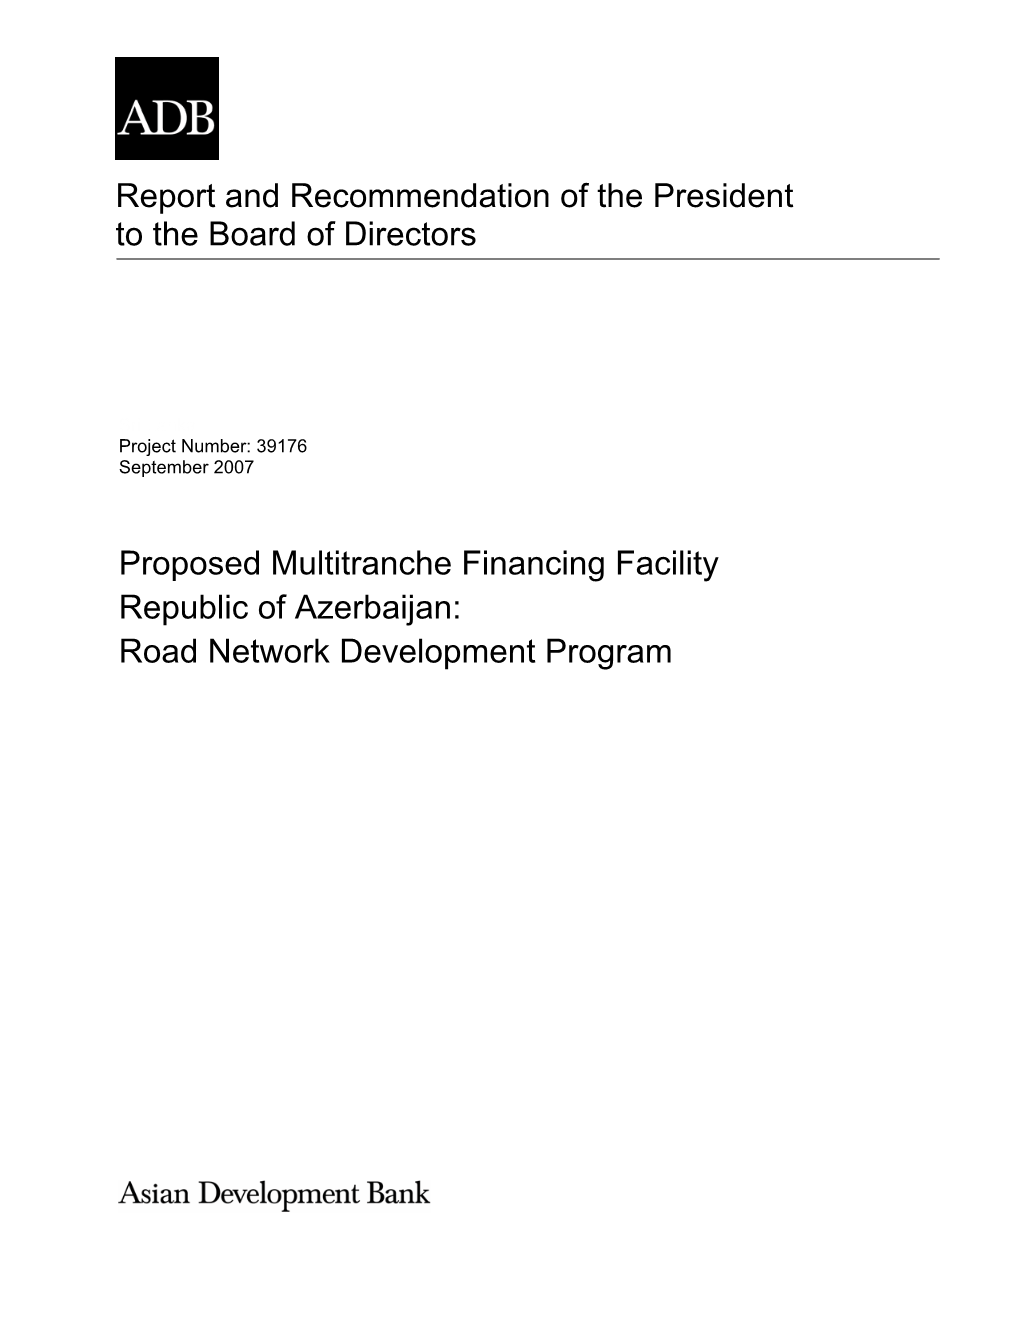 Proposed Multitranche Financing Facility: Road Network